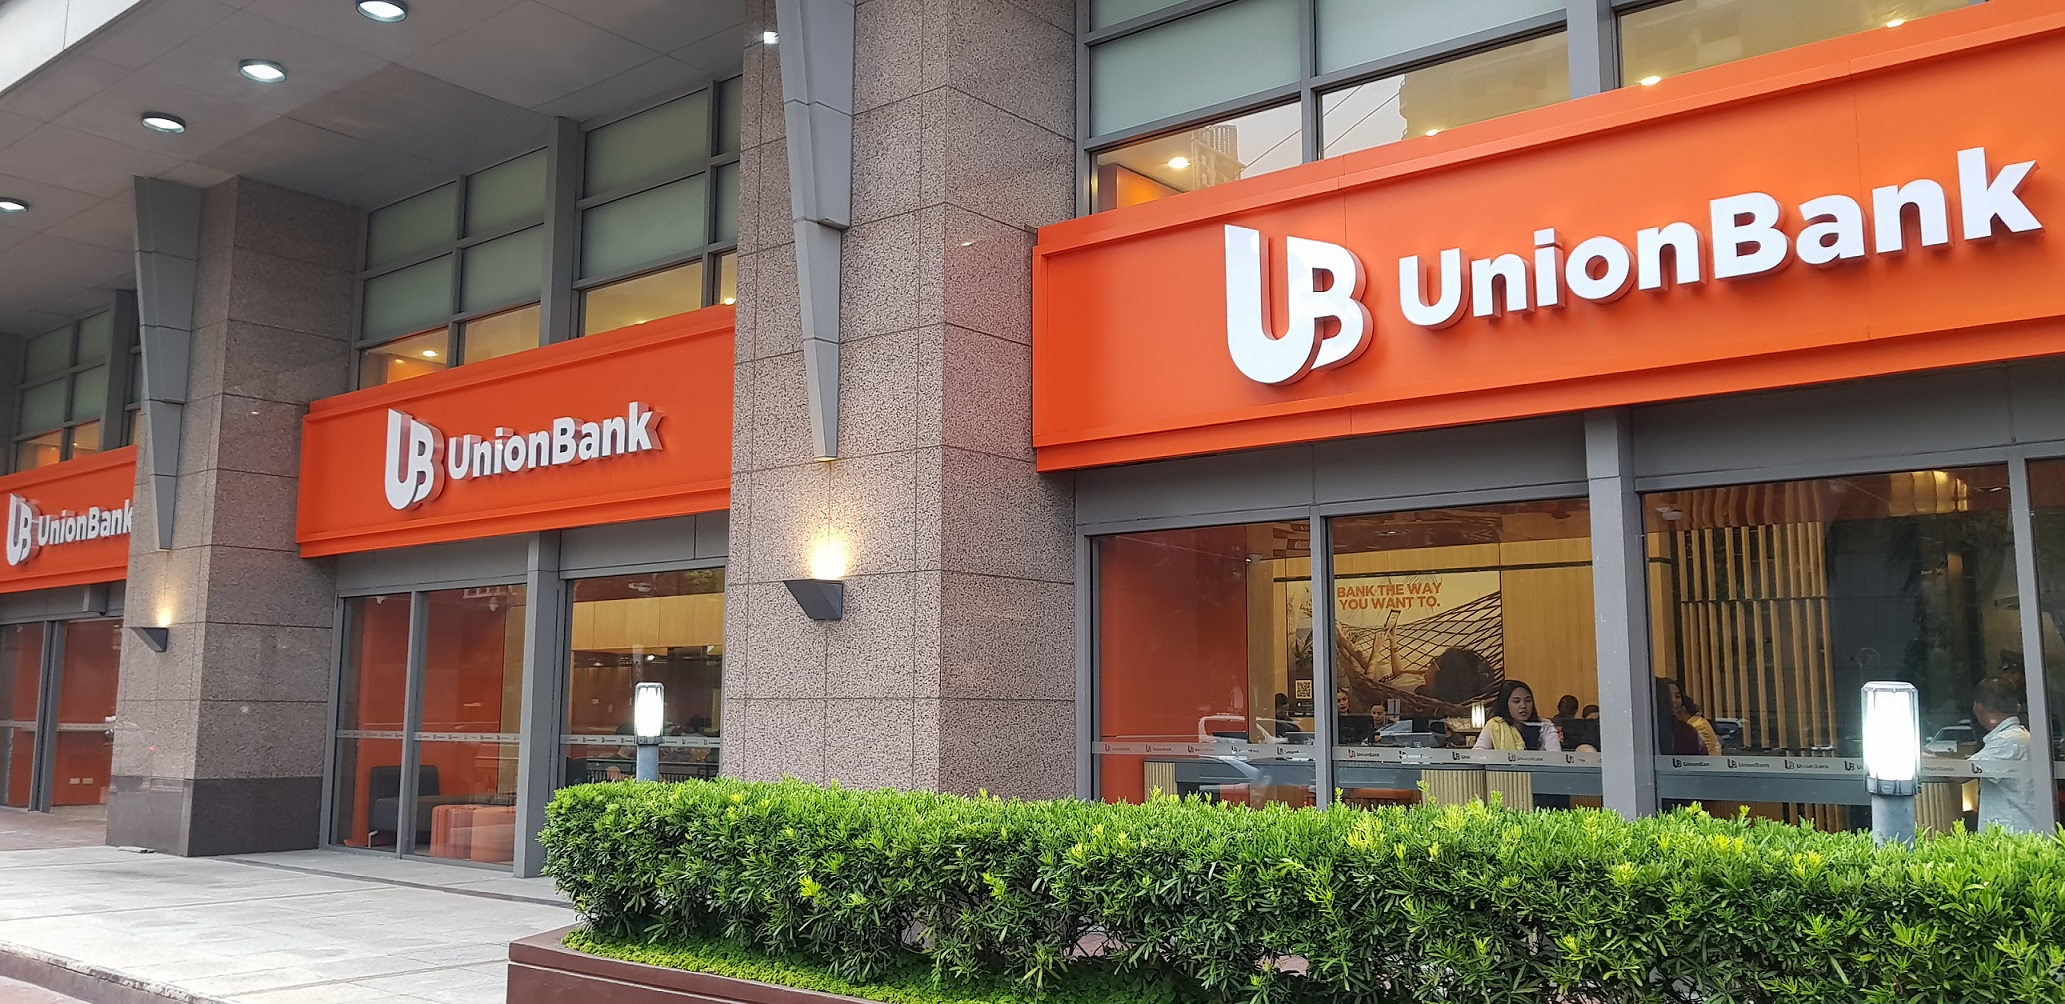 UnionBank scores another digital first with quick, secure, convenient checking account opening for corporations